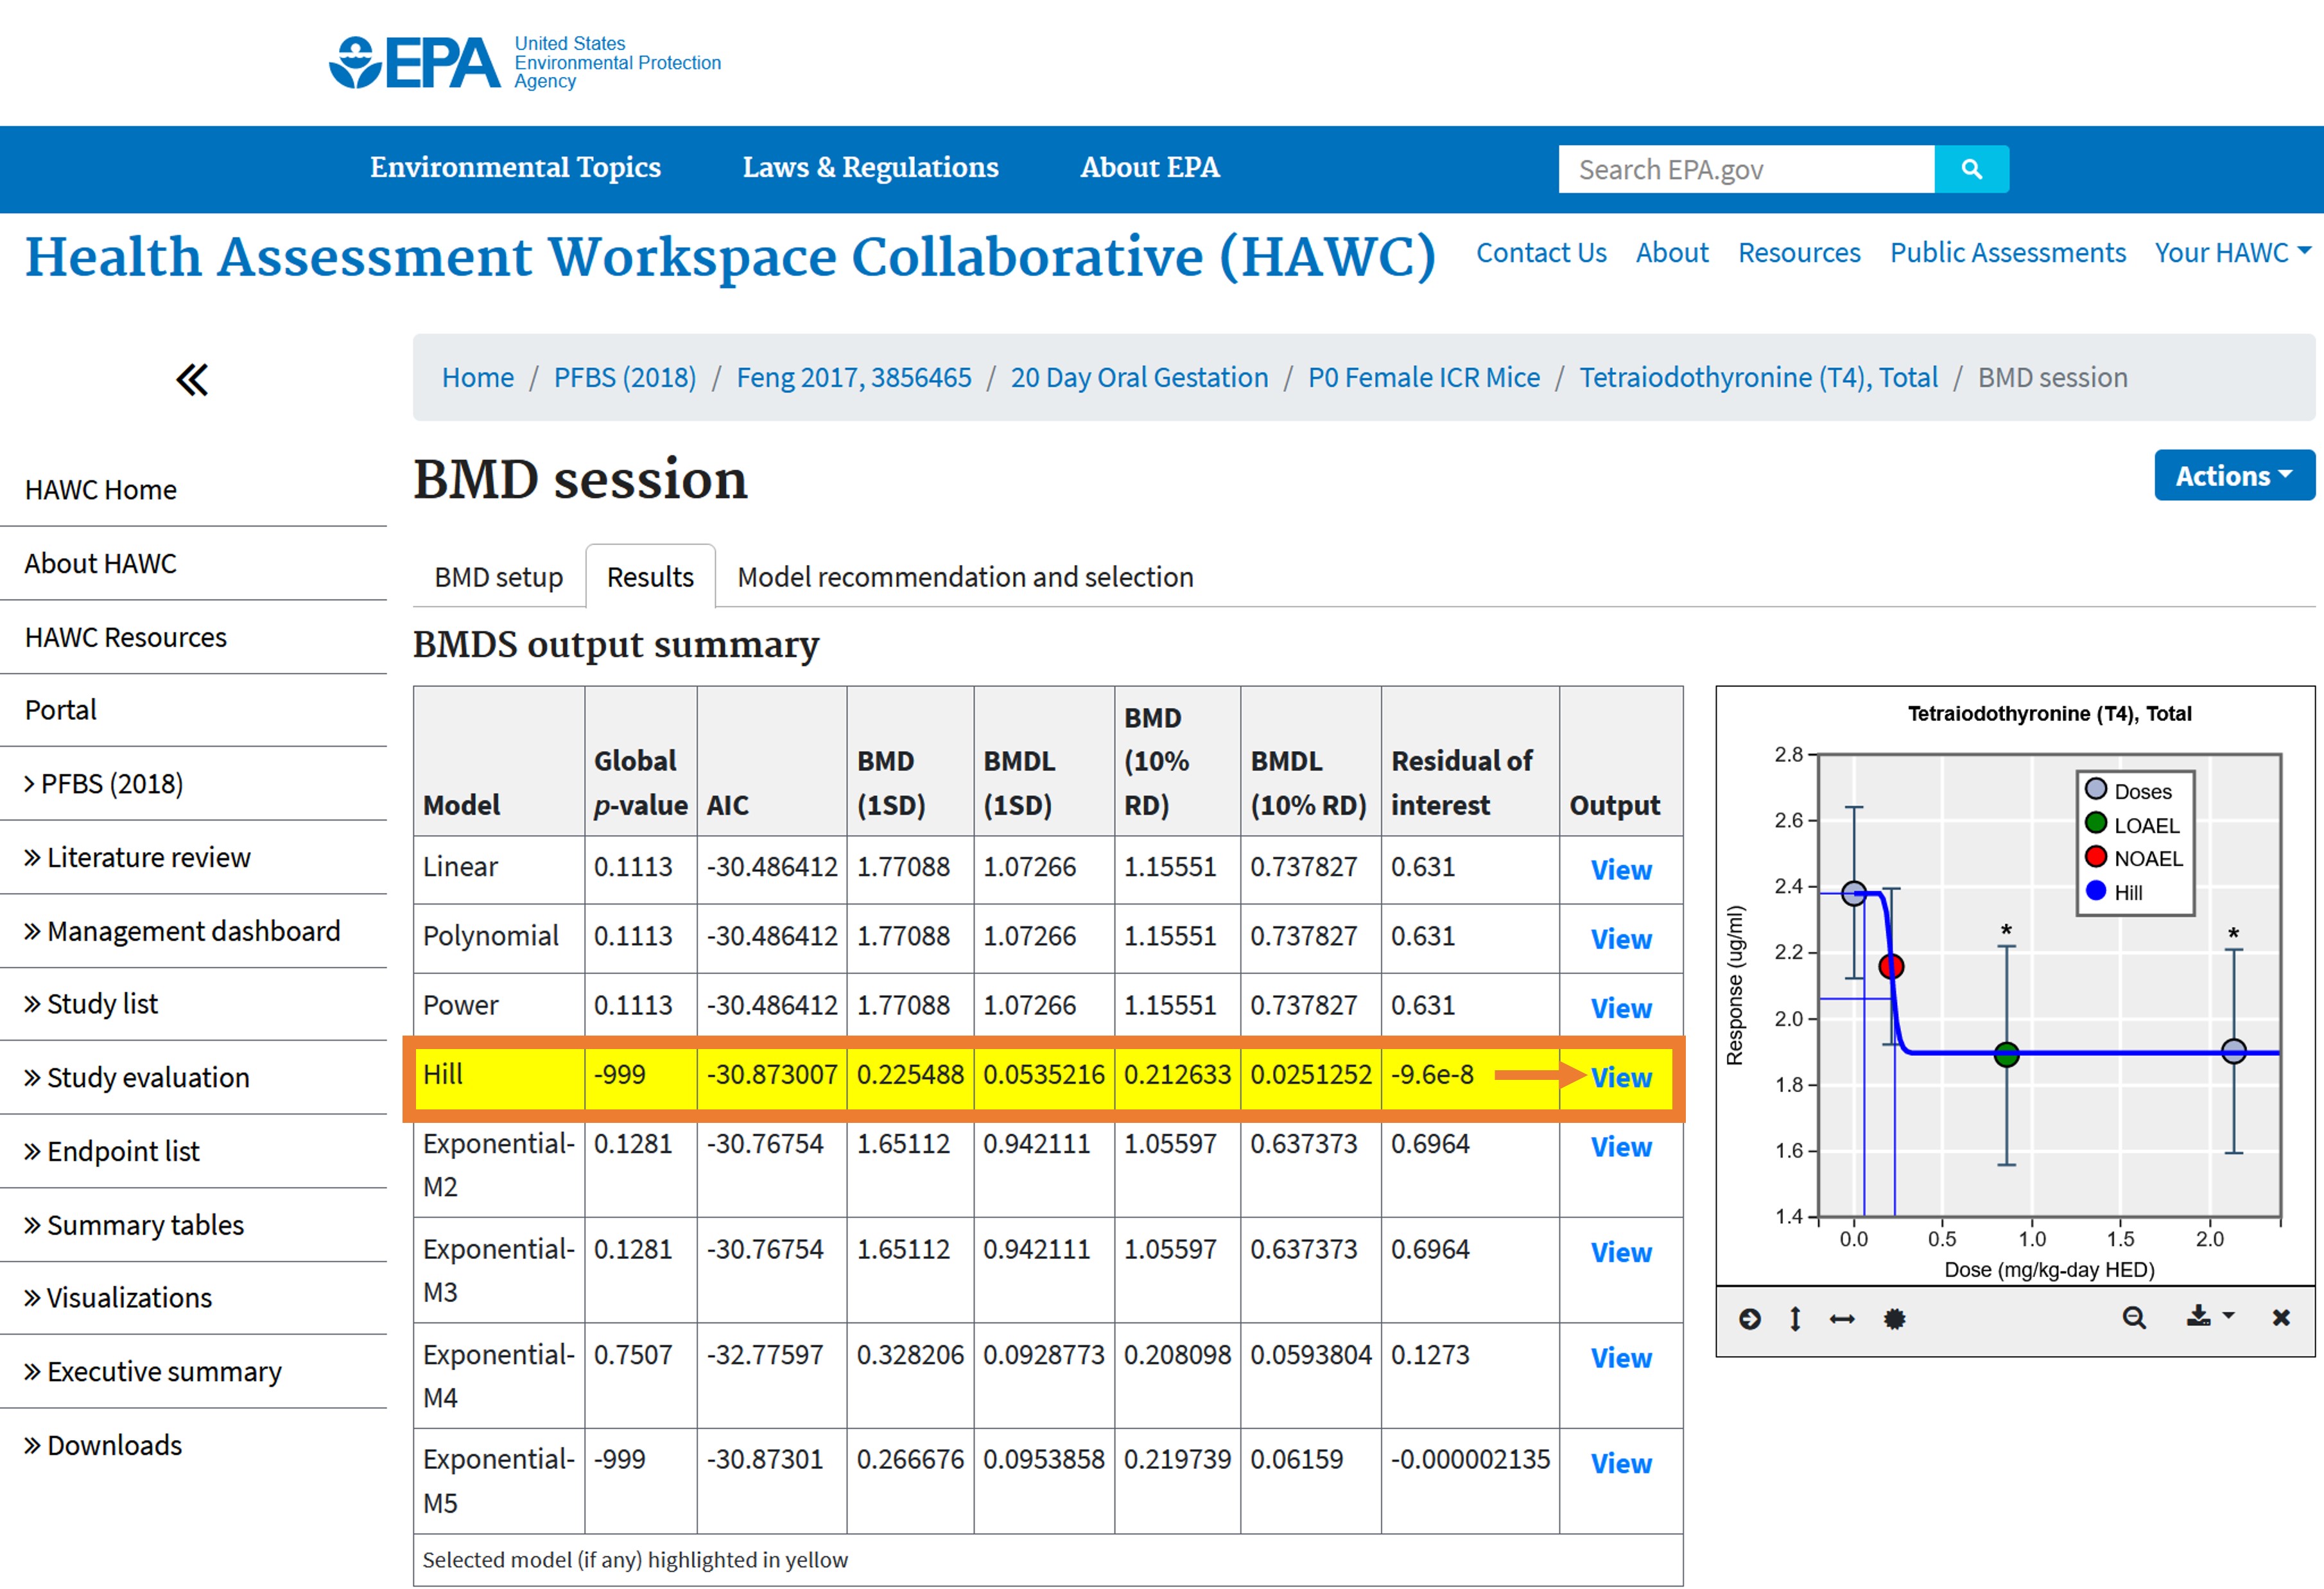 Illustration showing where the results tab will display the BMD modeling output summary for all models